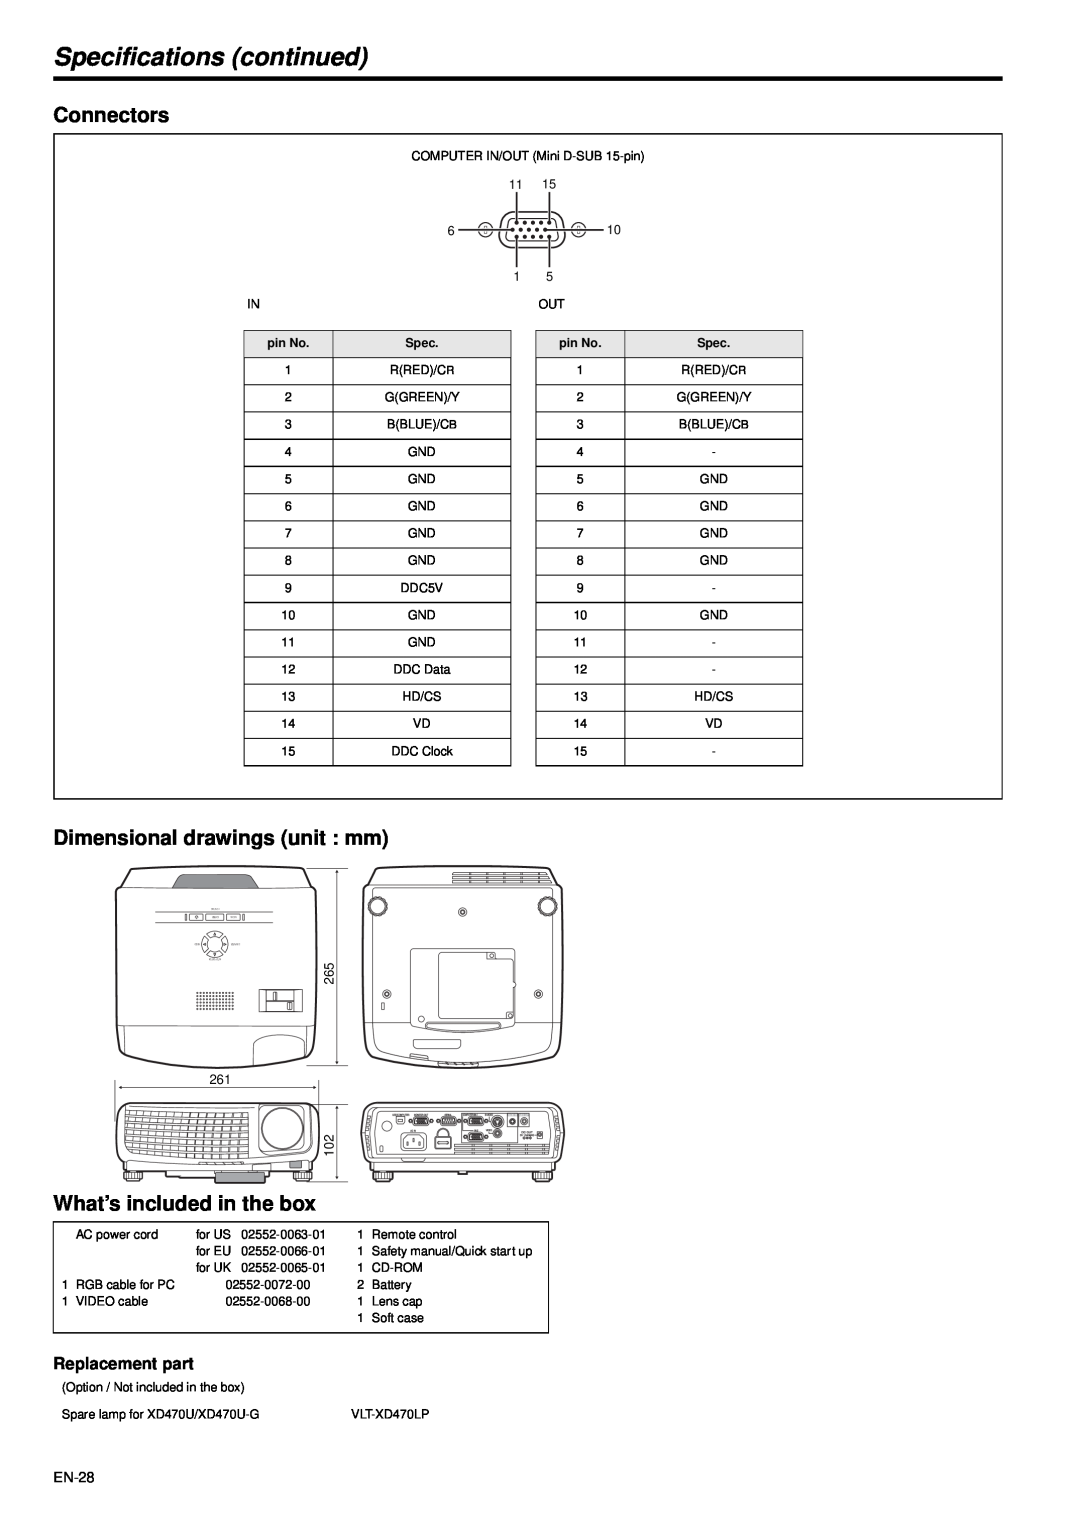 Mitsubishi Electronics XD470U-G Specifications continued, Connectors, Dimensional drawings unit mm, Replacement part 